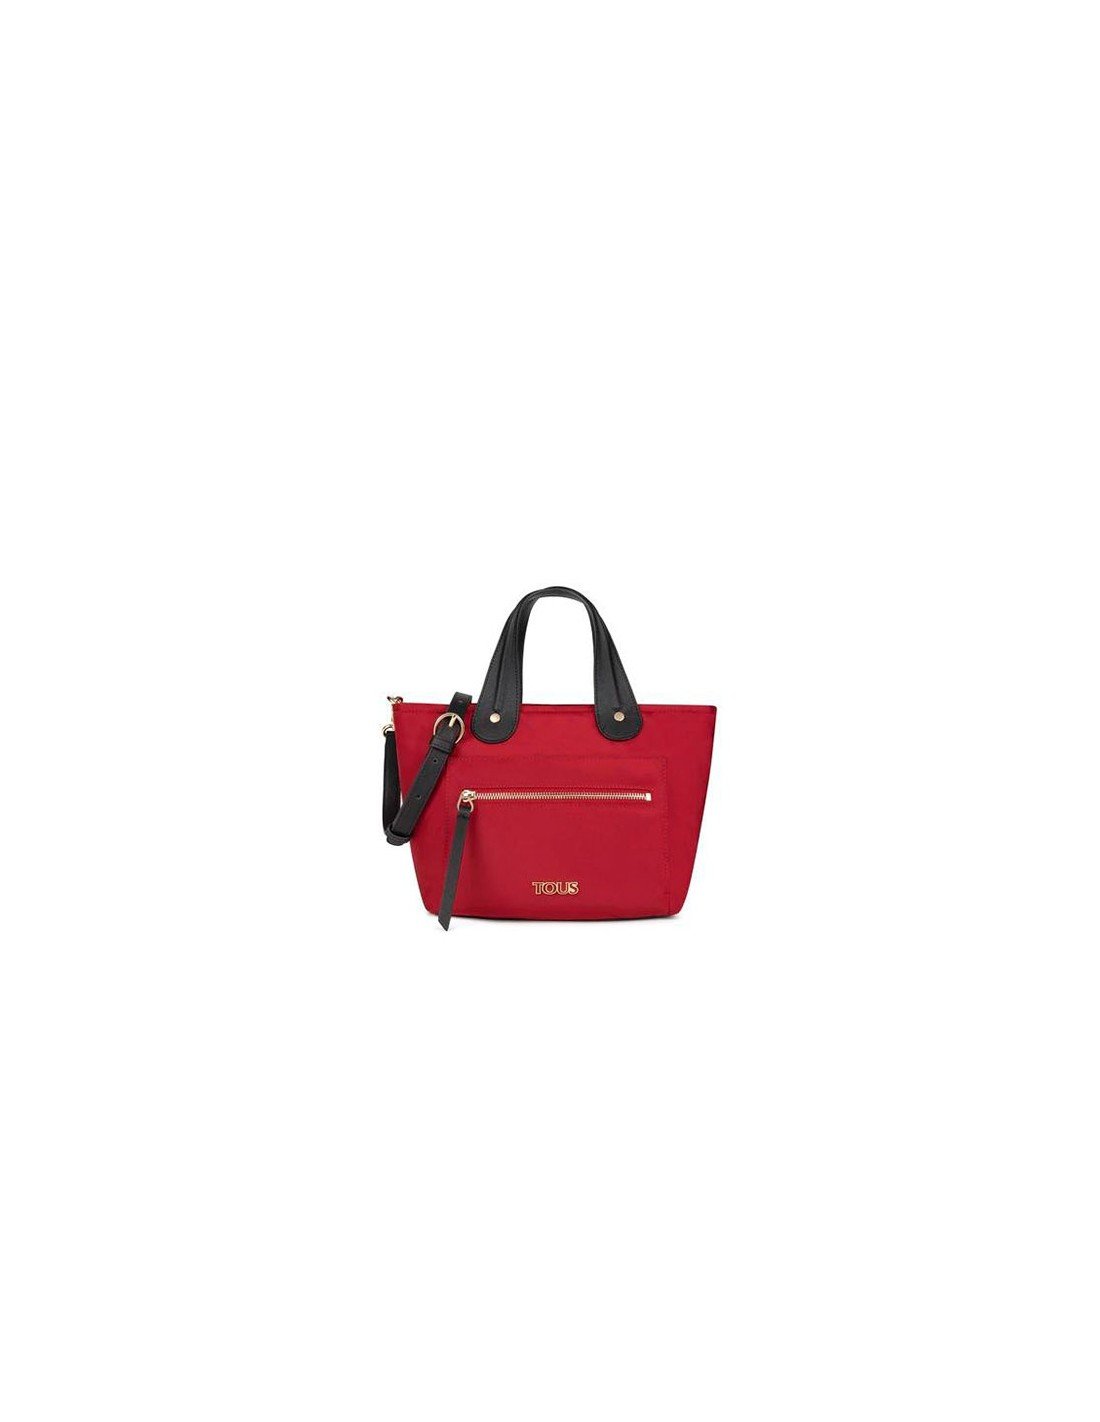 Tous Red Shelby Tote Bag, latest offers on Tous Moda fashion accessories